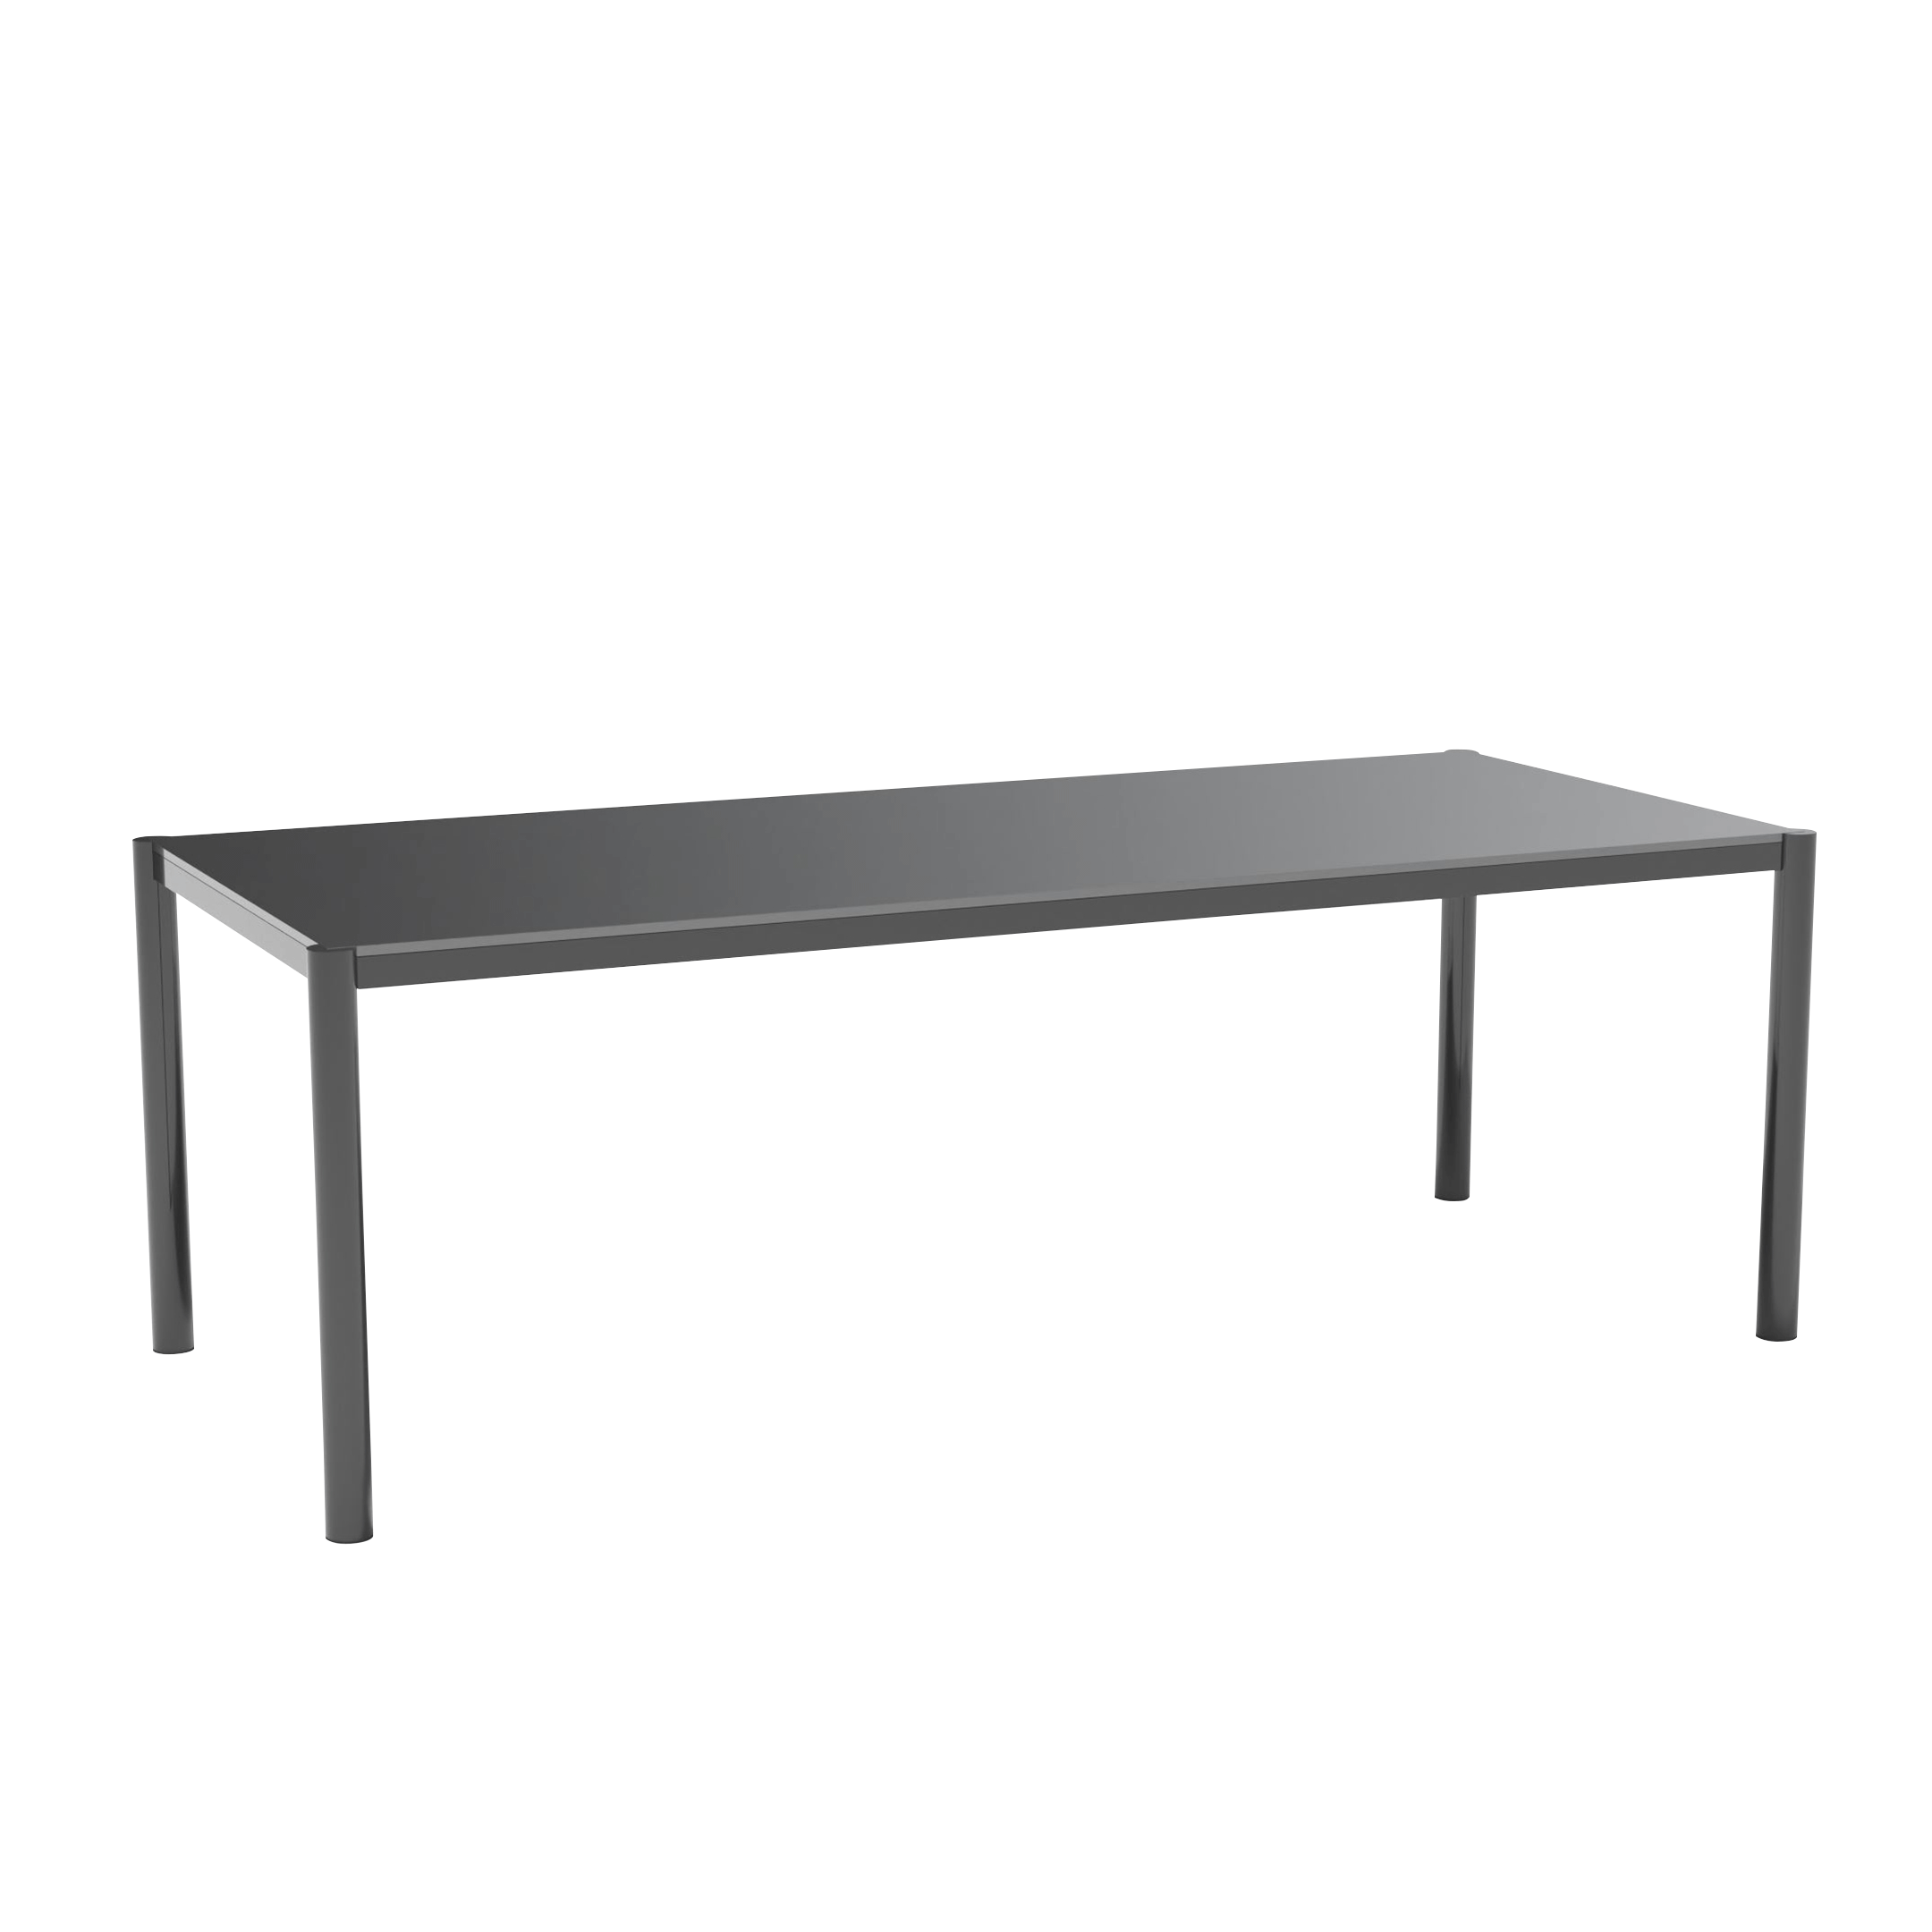 Get-Together Dining Table 84"